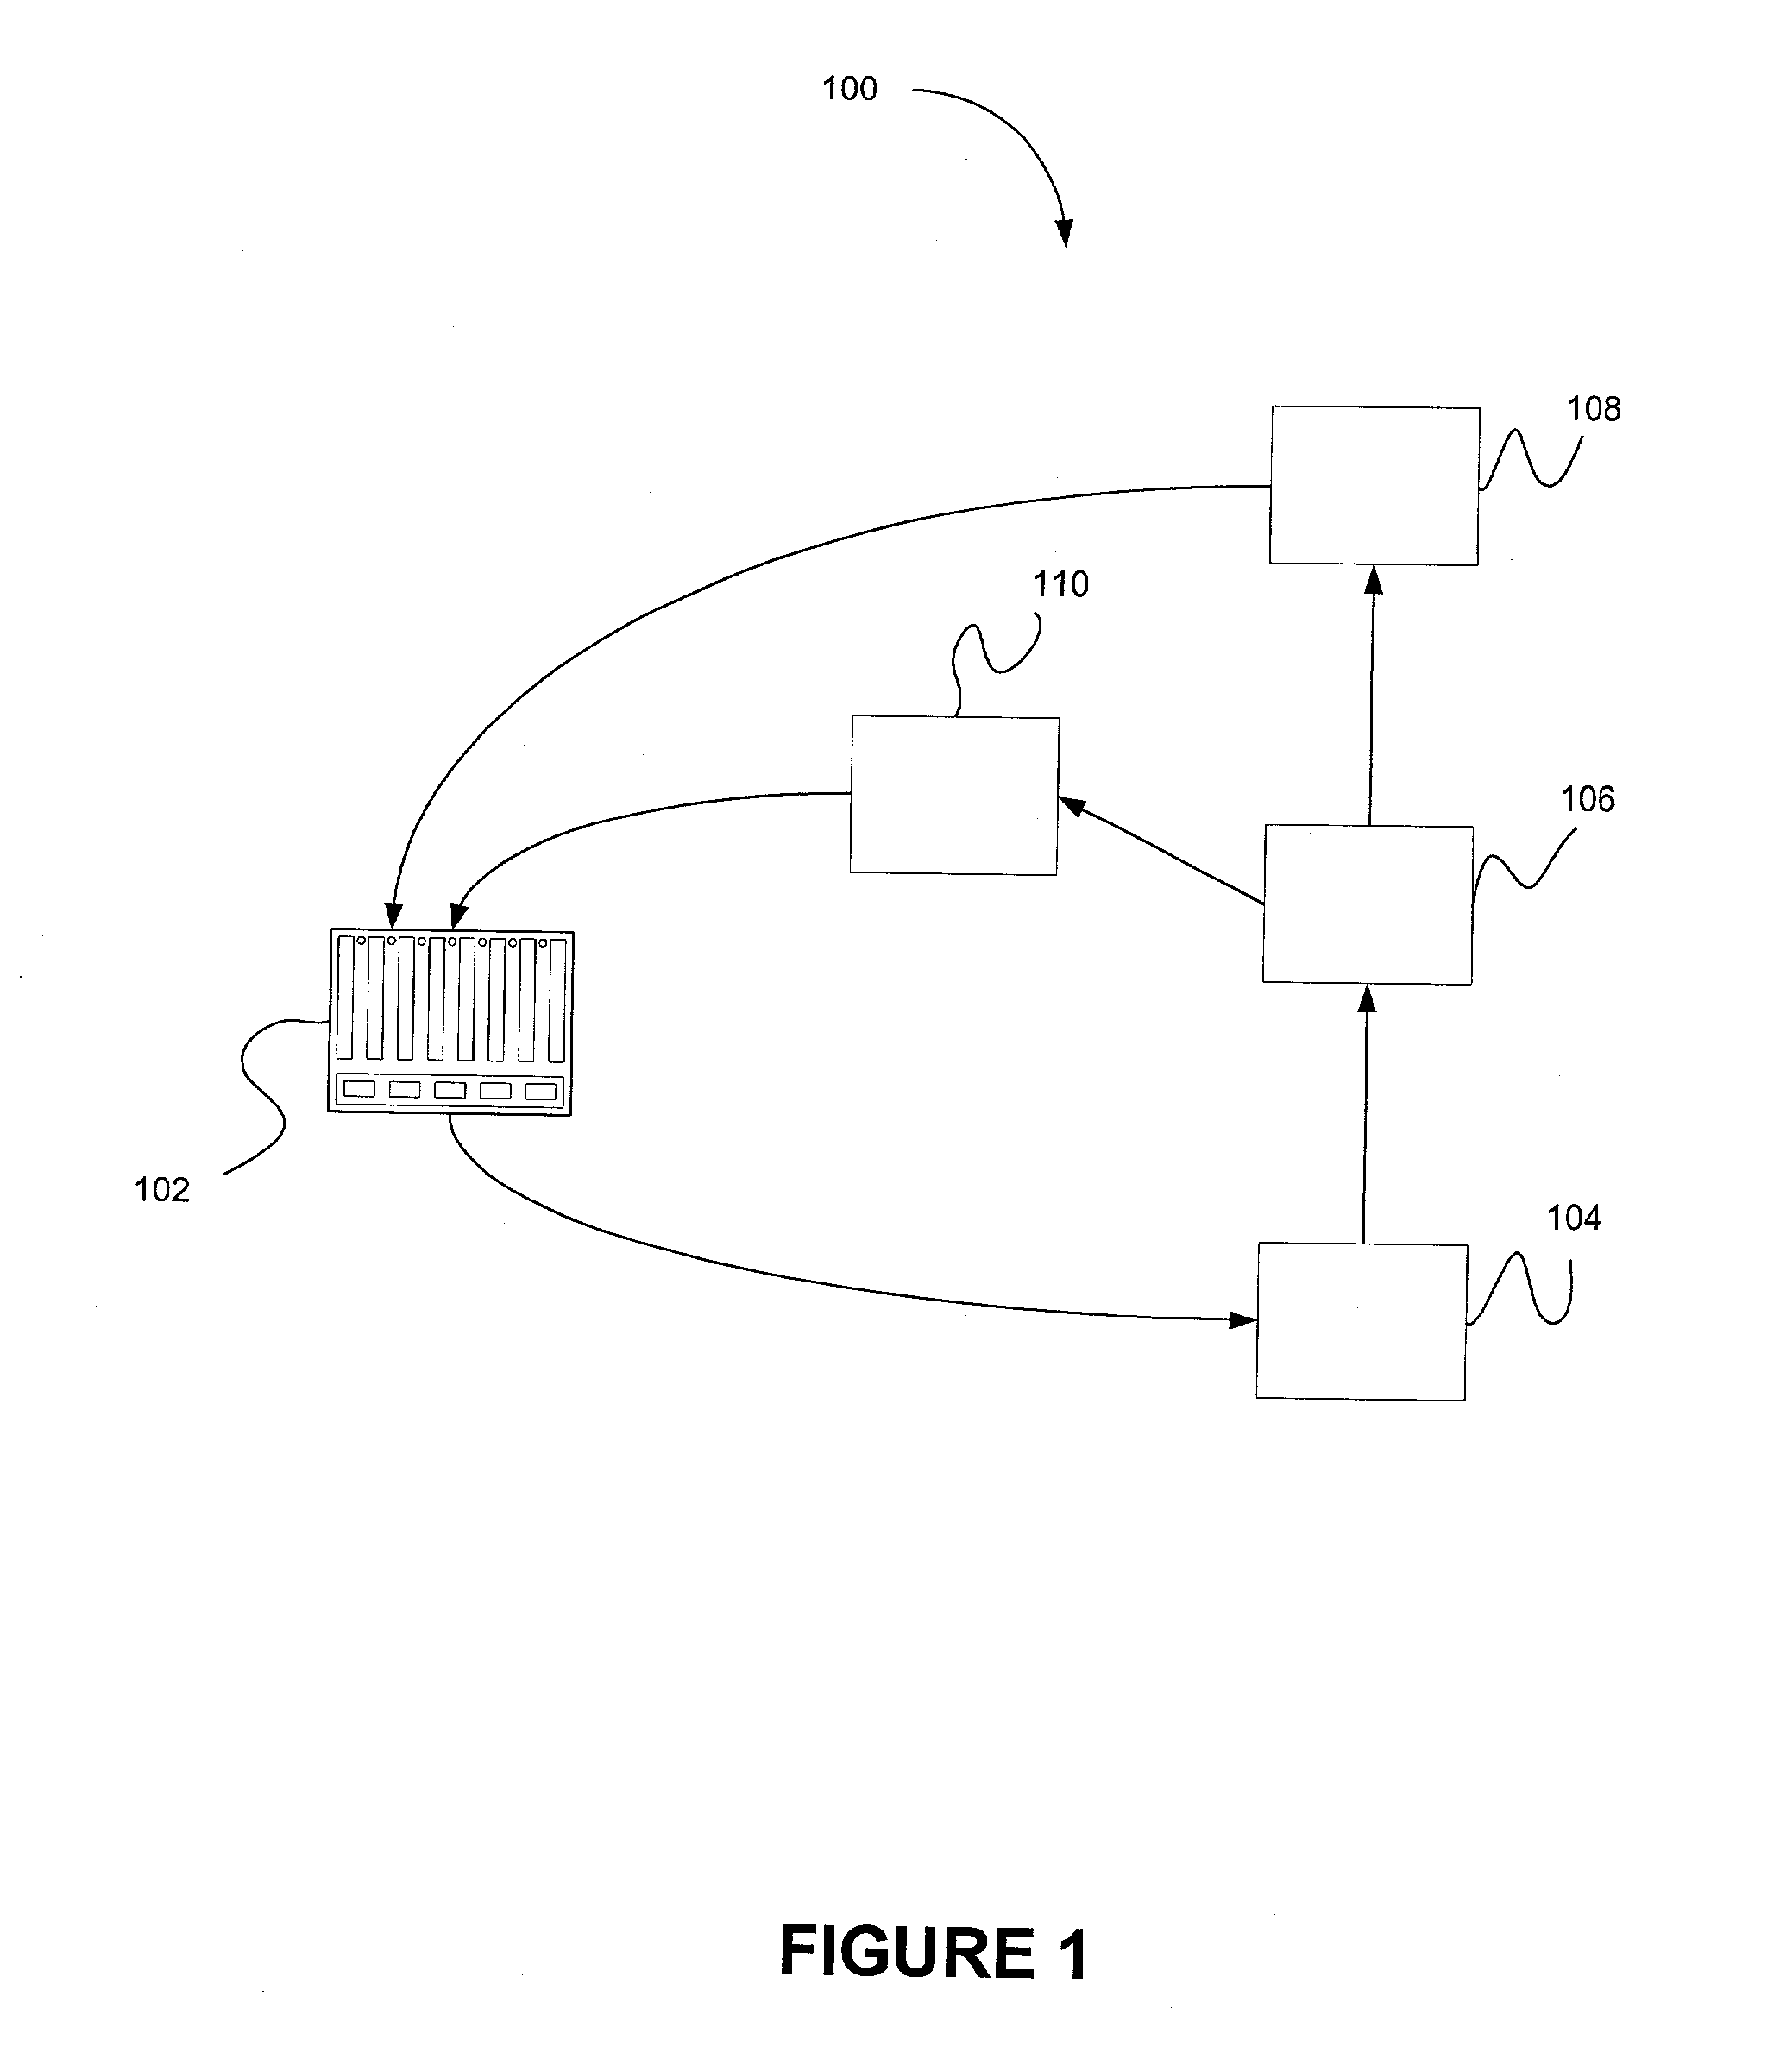 Method of and system for determining the remaining energy in a metal fuel cell